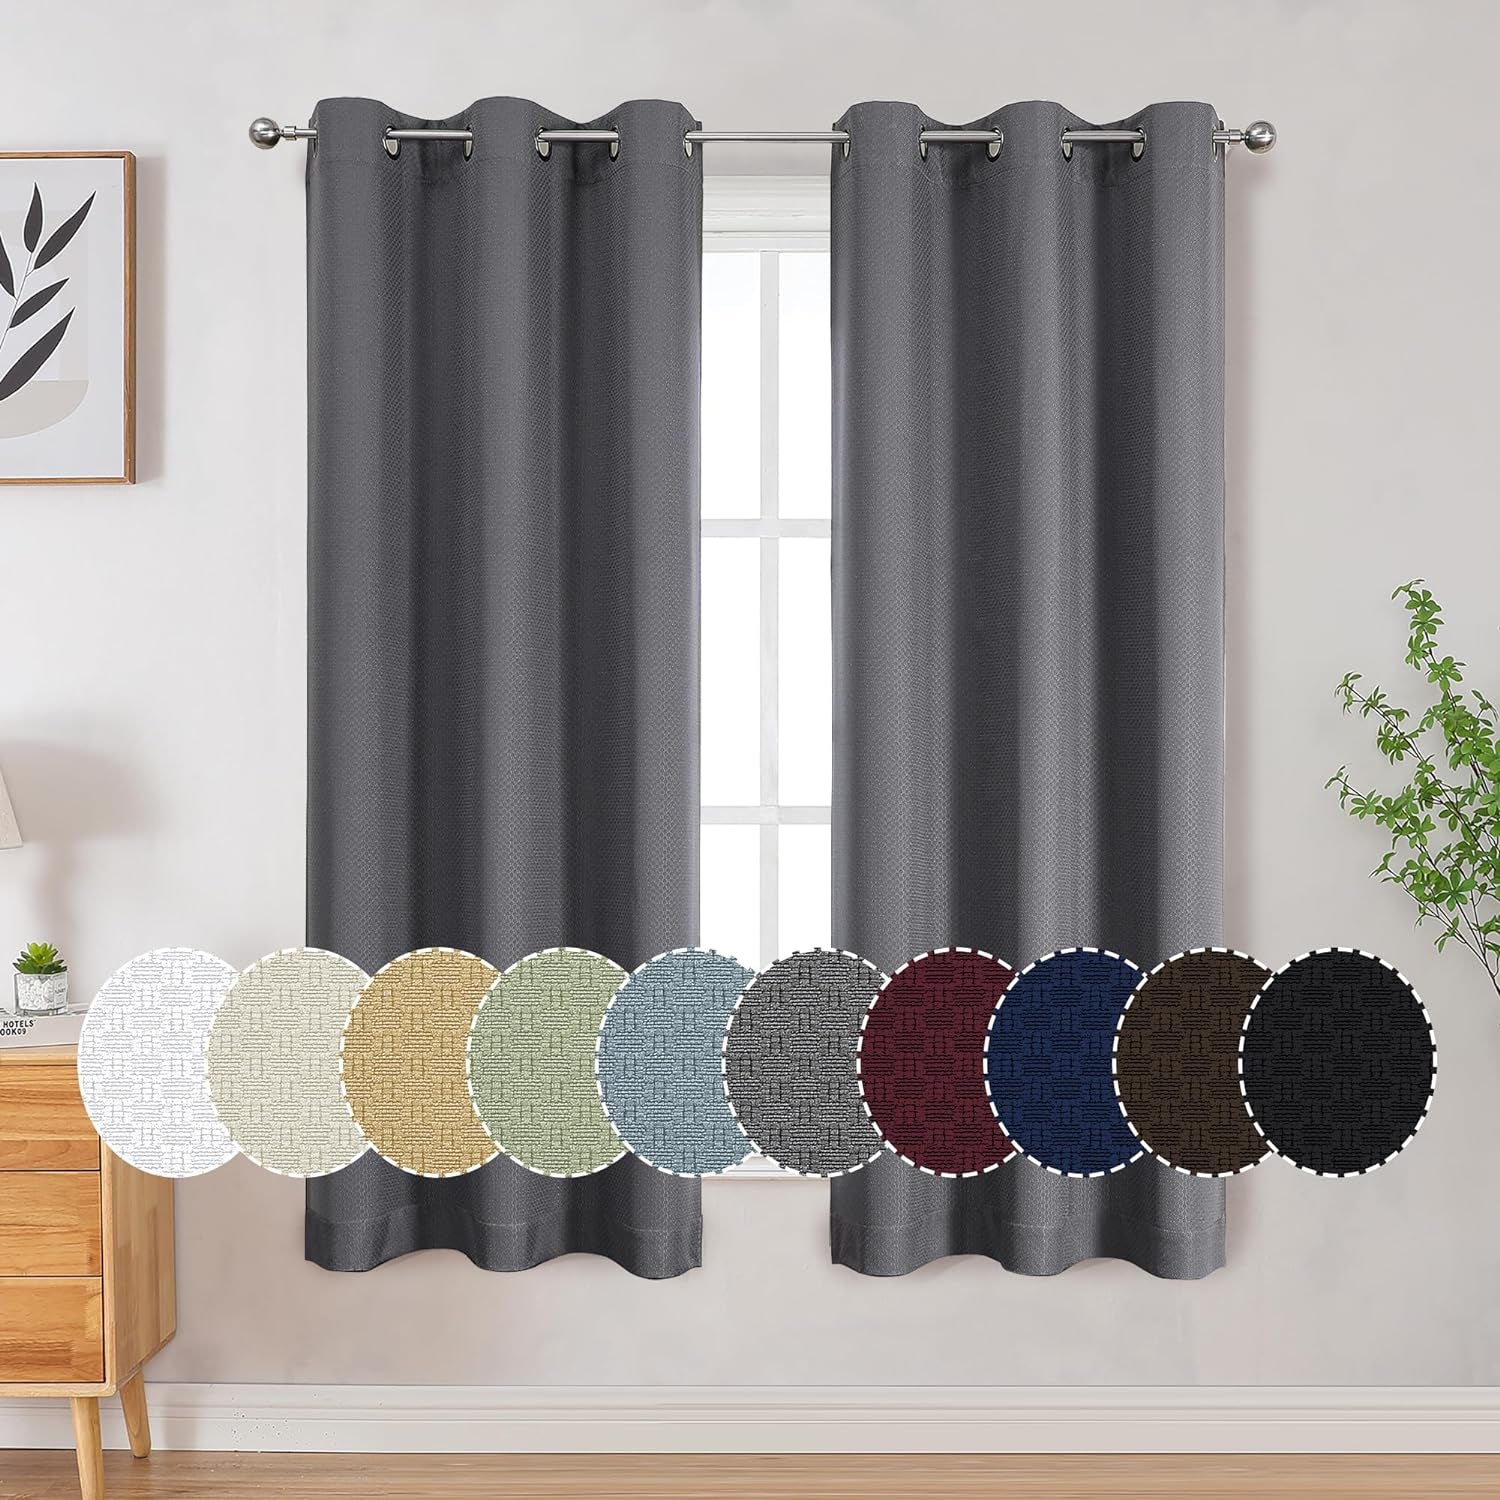 OVZME 100% Black Out Curtains 63 Inch Long 2 Panel Sets for Living Room, Completely Blackout Bedroom Drapes Textured Thermal Insulated Warm Fleece for Winter, Grommet Top, 42W X 63L, Sky Blue  OVZME Charcoal Grey 42W X 63L Inch X 2 Panels 